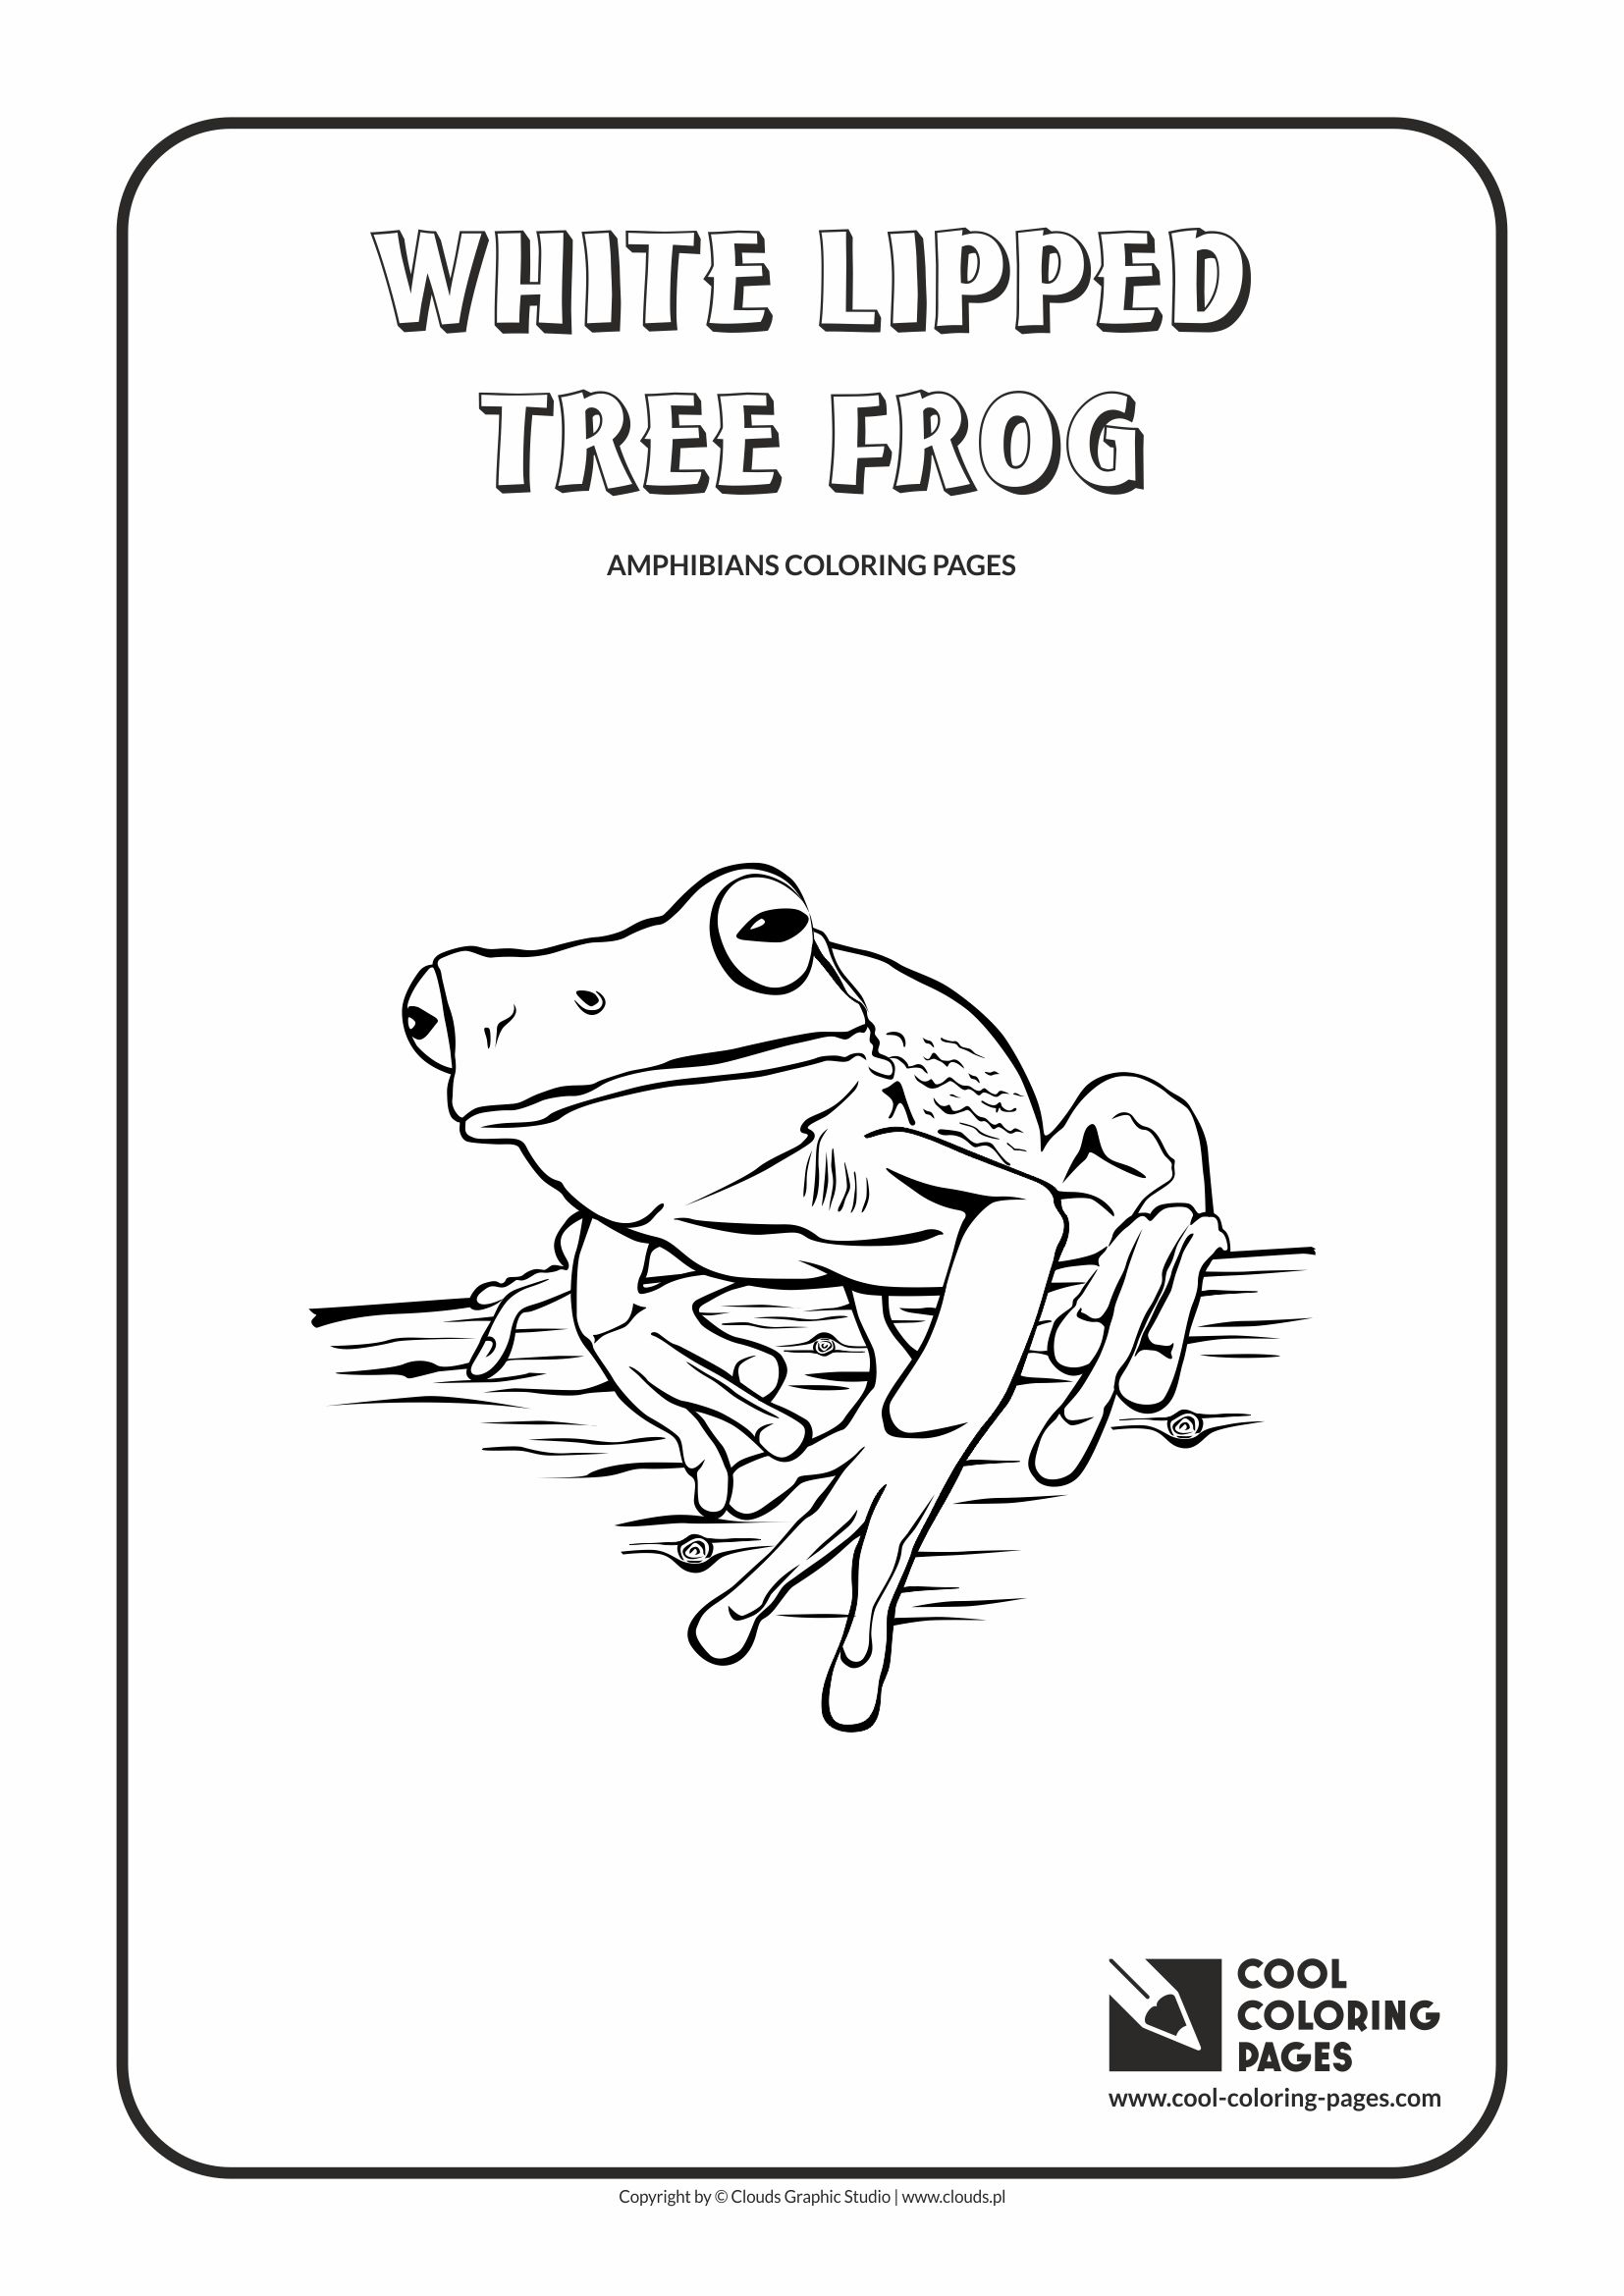 White-lipped Tree Frog coloring #10, Download drawings